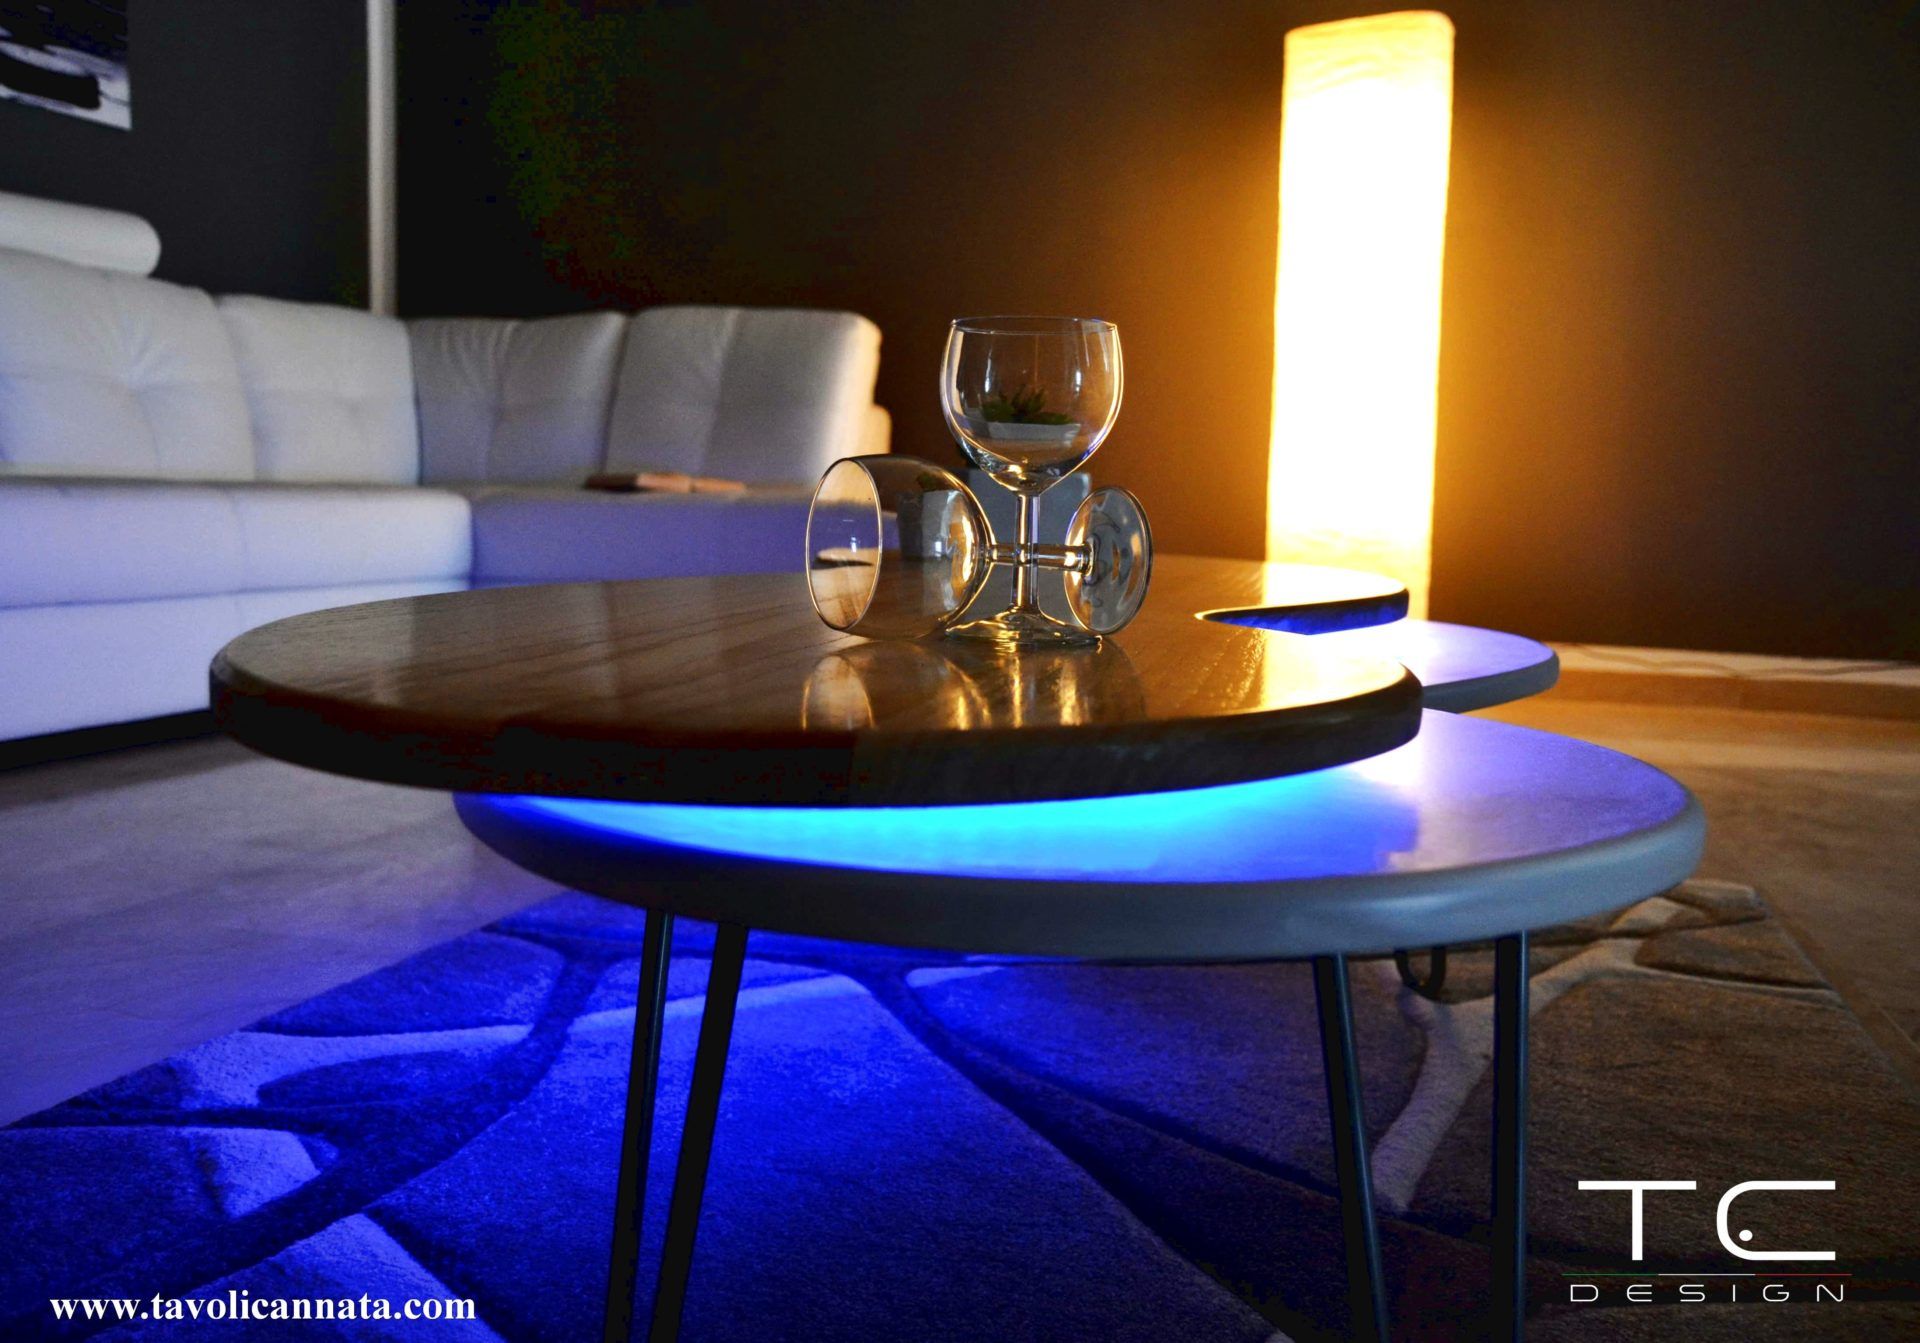 Coffee Table With Led Light Unique Design Made In Italy – Tavolini Cannata Regarding Coffee Tables With Led Lights (View 8 of 15)